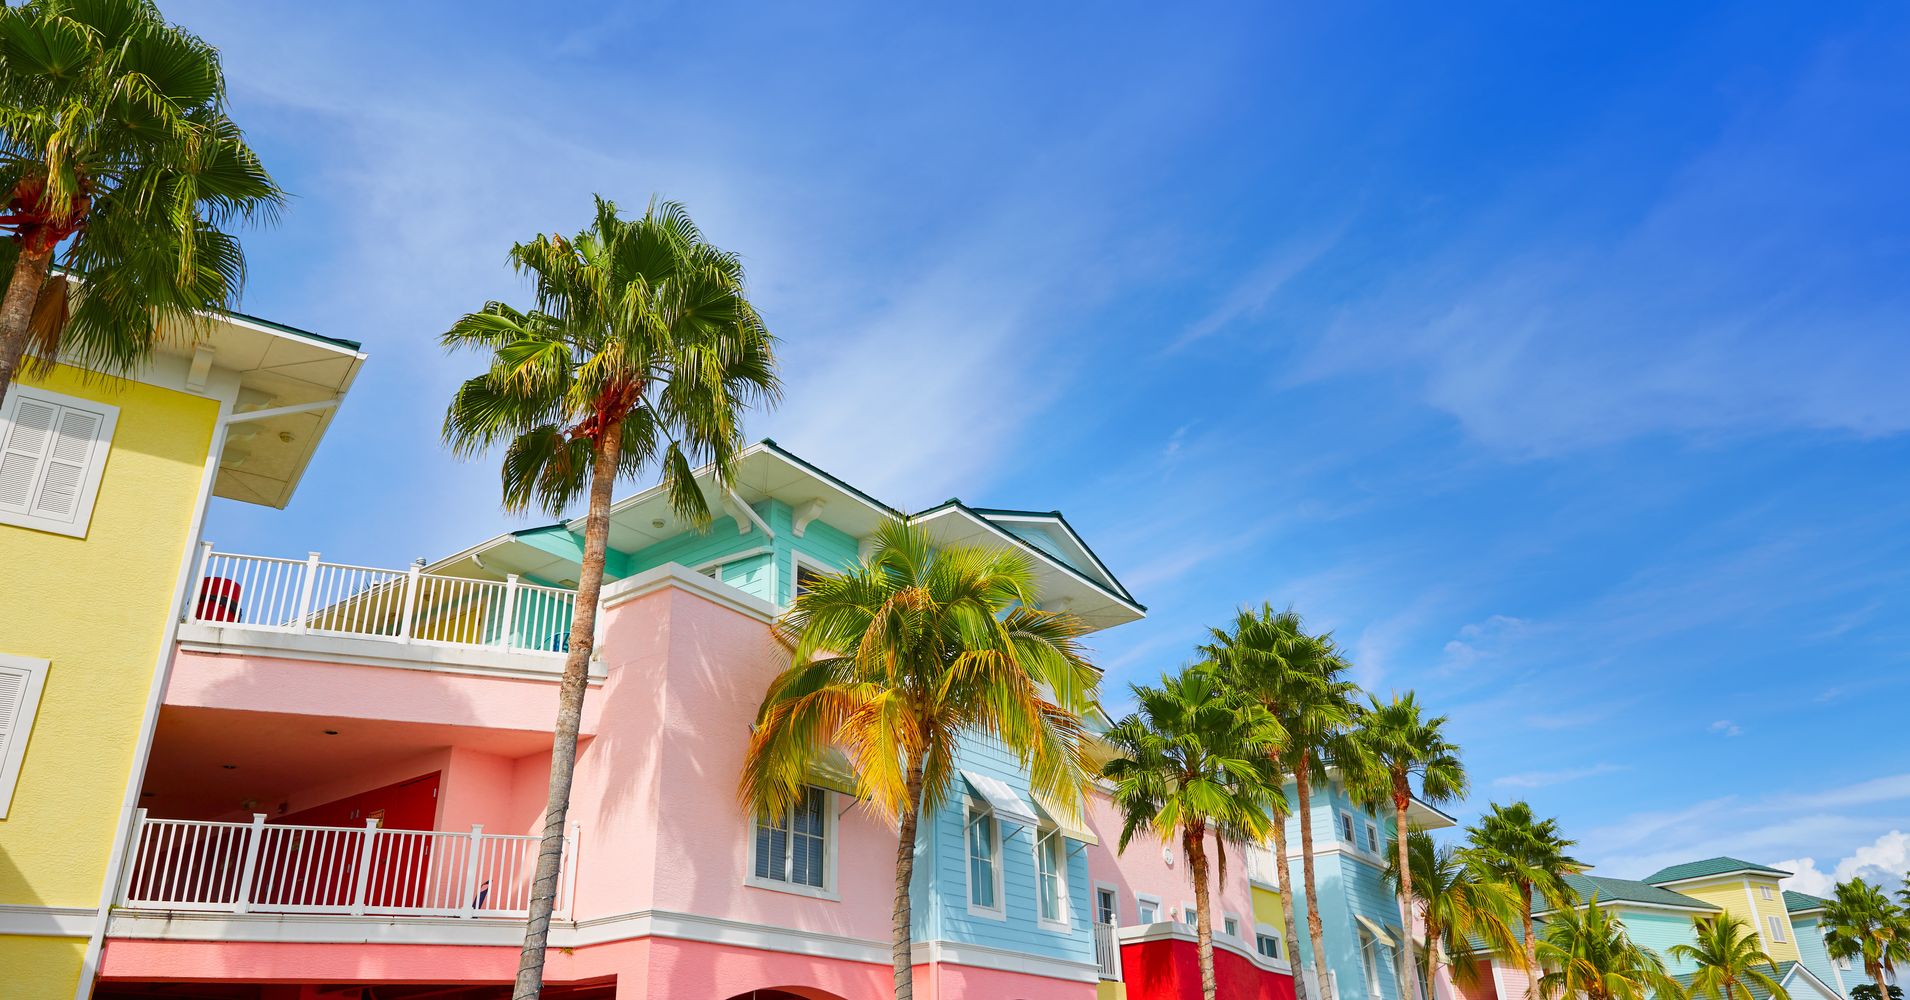 10 Alternatives To Airbnb For Vacation Rentals  HuffPost